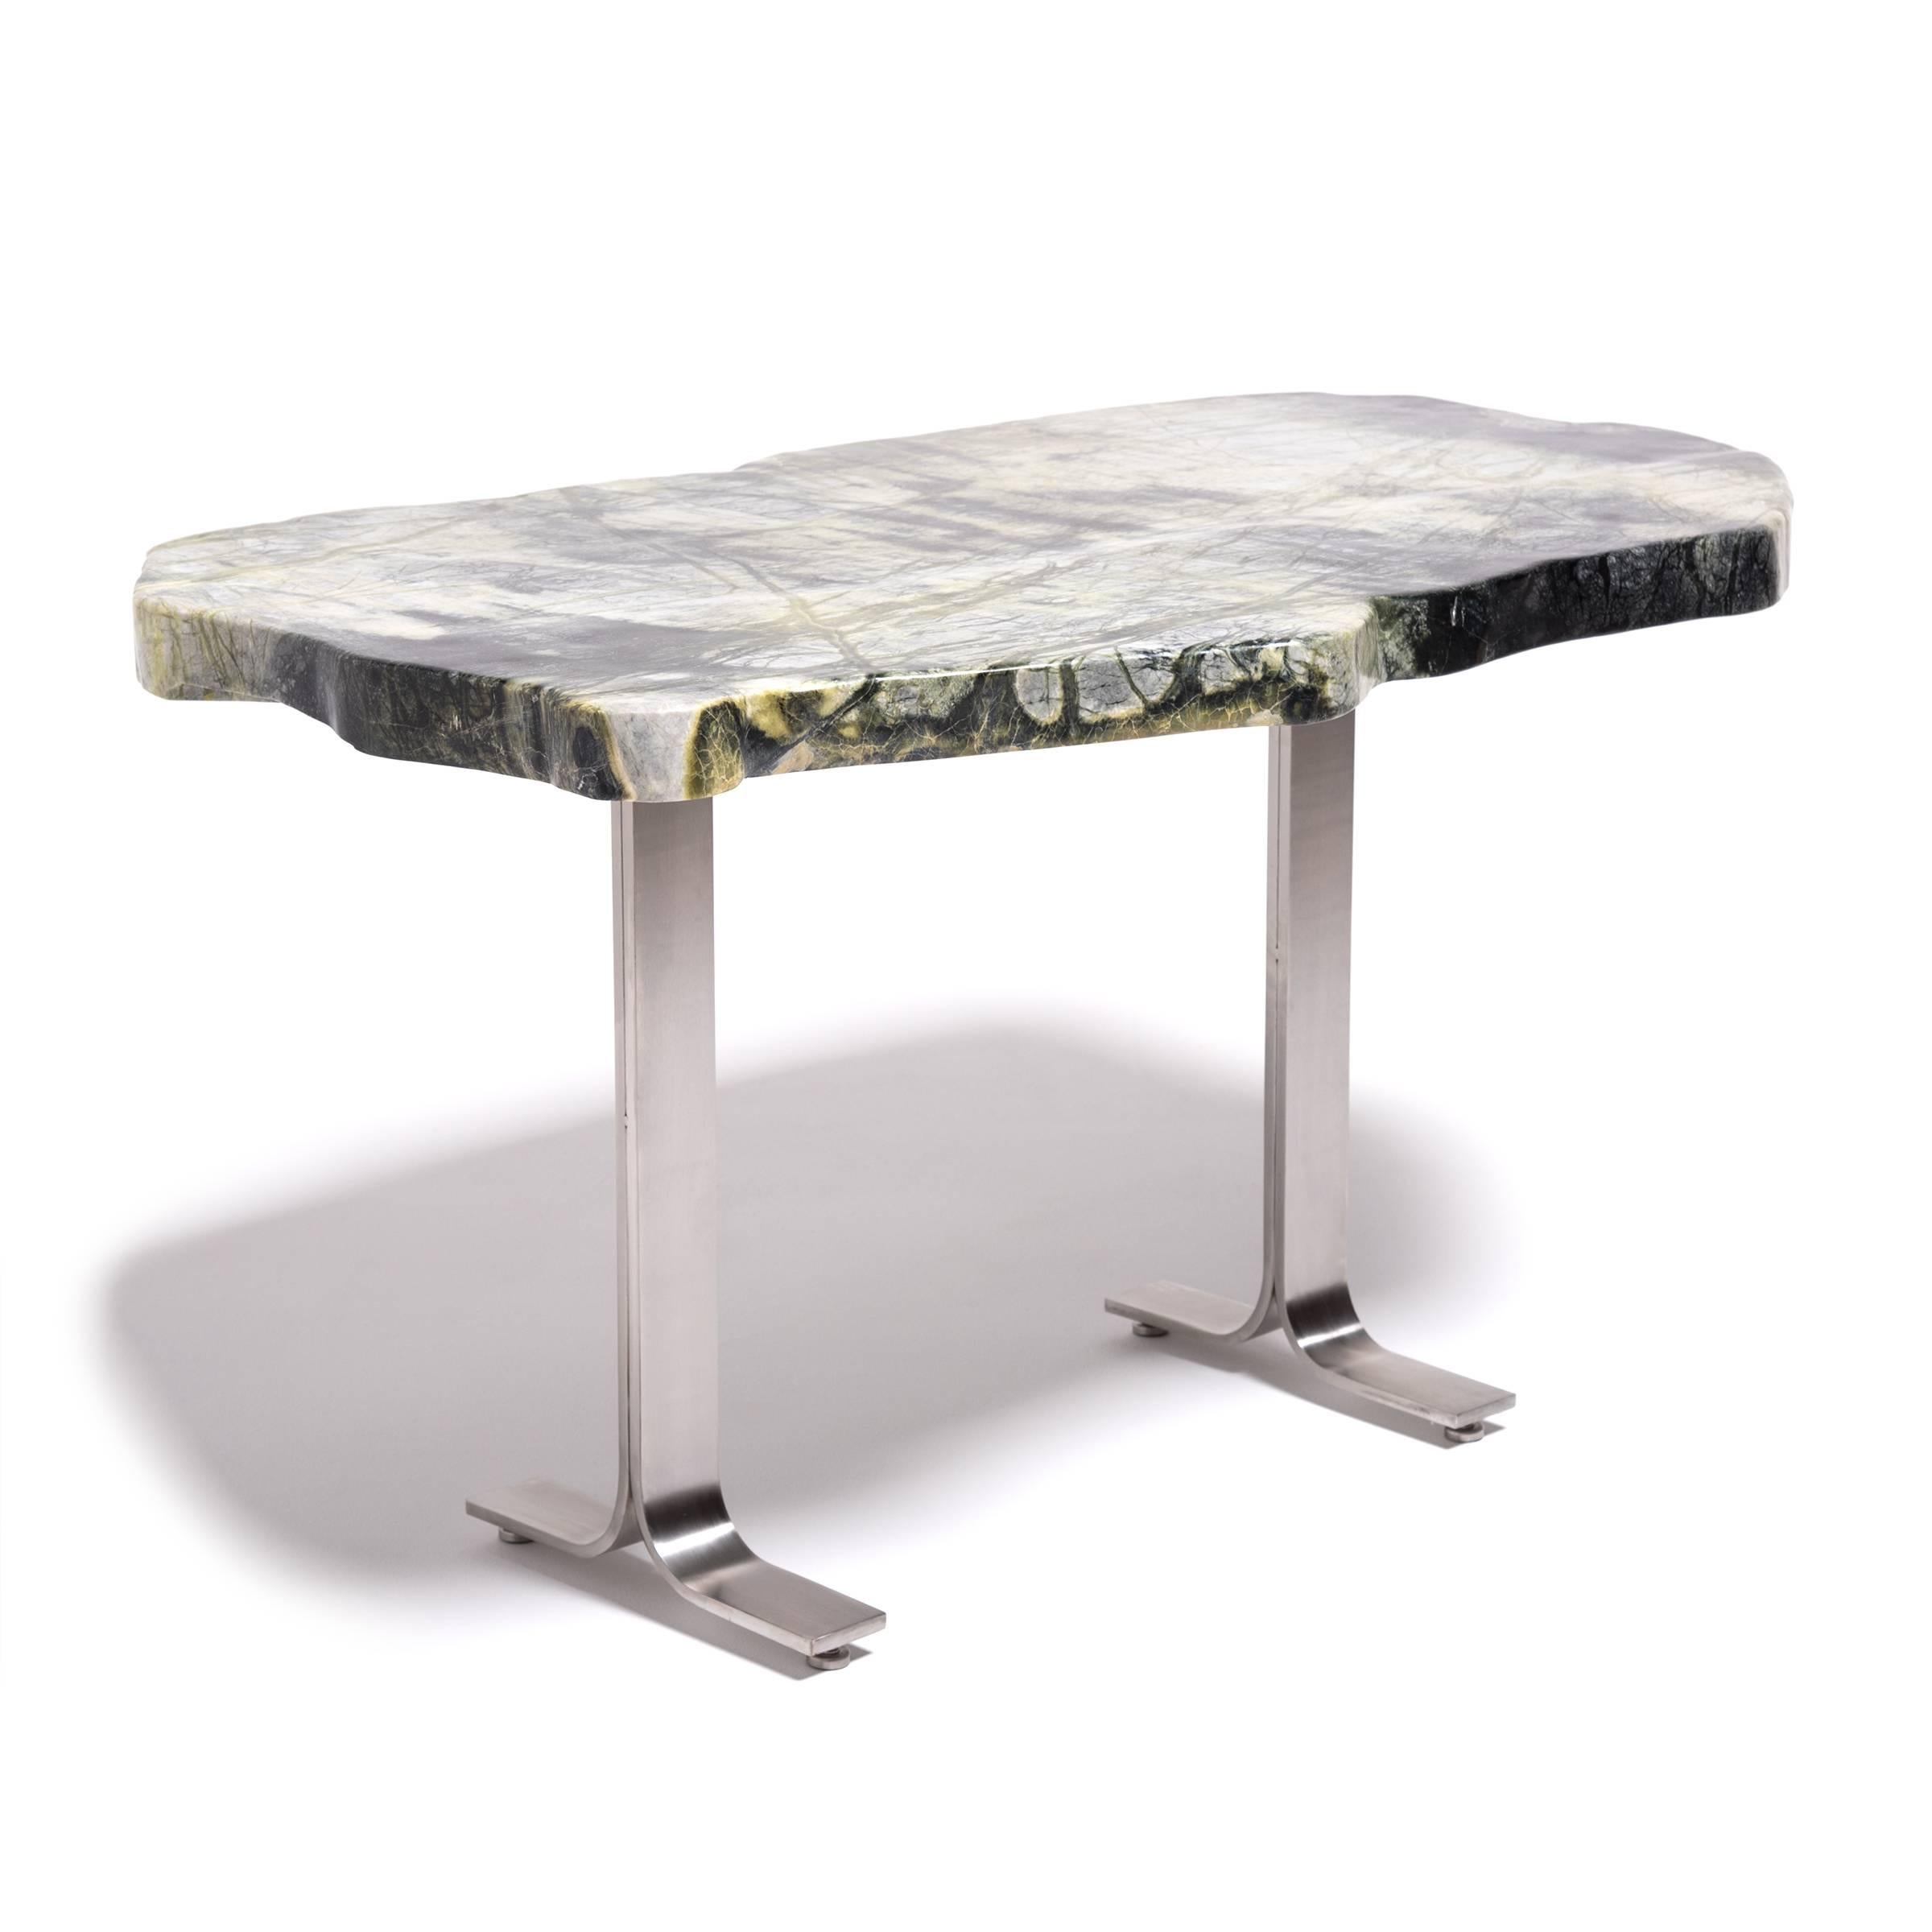 Prized by ancient scholars, meditation stones inspired the mind while they composed poetry, painted landscapes, or brushed calligraphy. The irregular shaped greenery stone specimen that tops this table is a mix of jadeite, moss agate, serpentine,